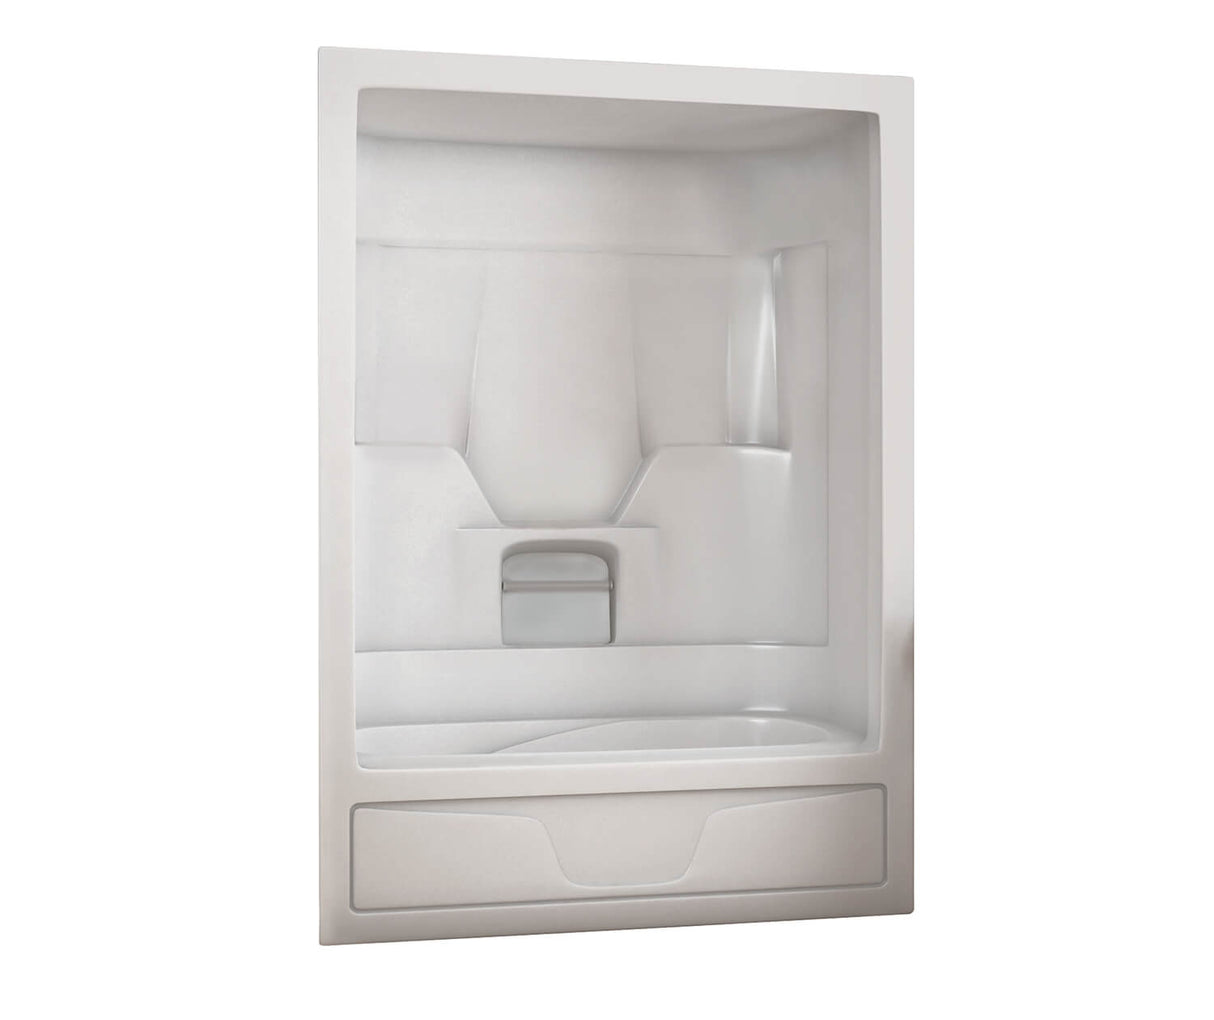 MAAX 101023-091-001-005 Aspen-3P 60 x 31 Acrylic Alcove Right-Hand Drain Three-Piece 10 Microjets Tub Shower in White